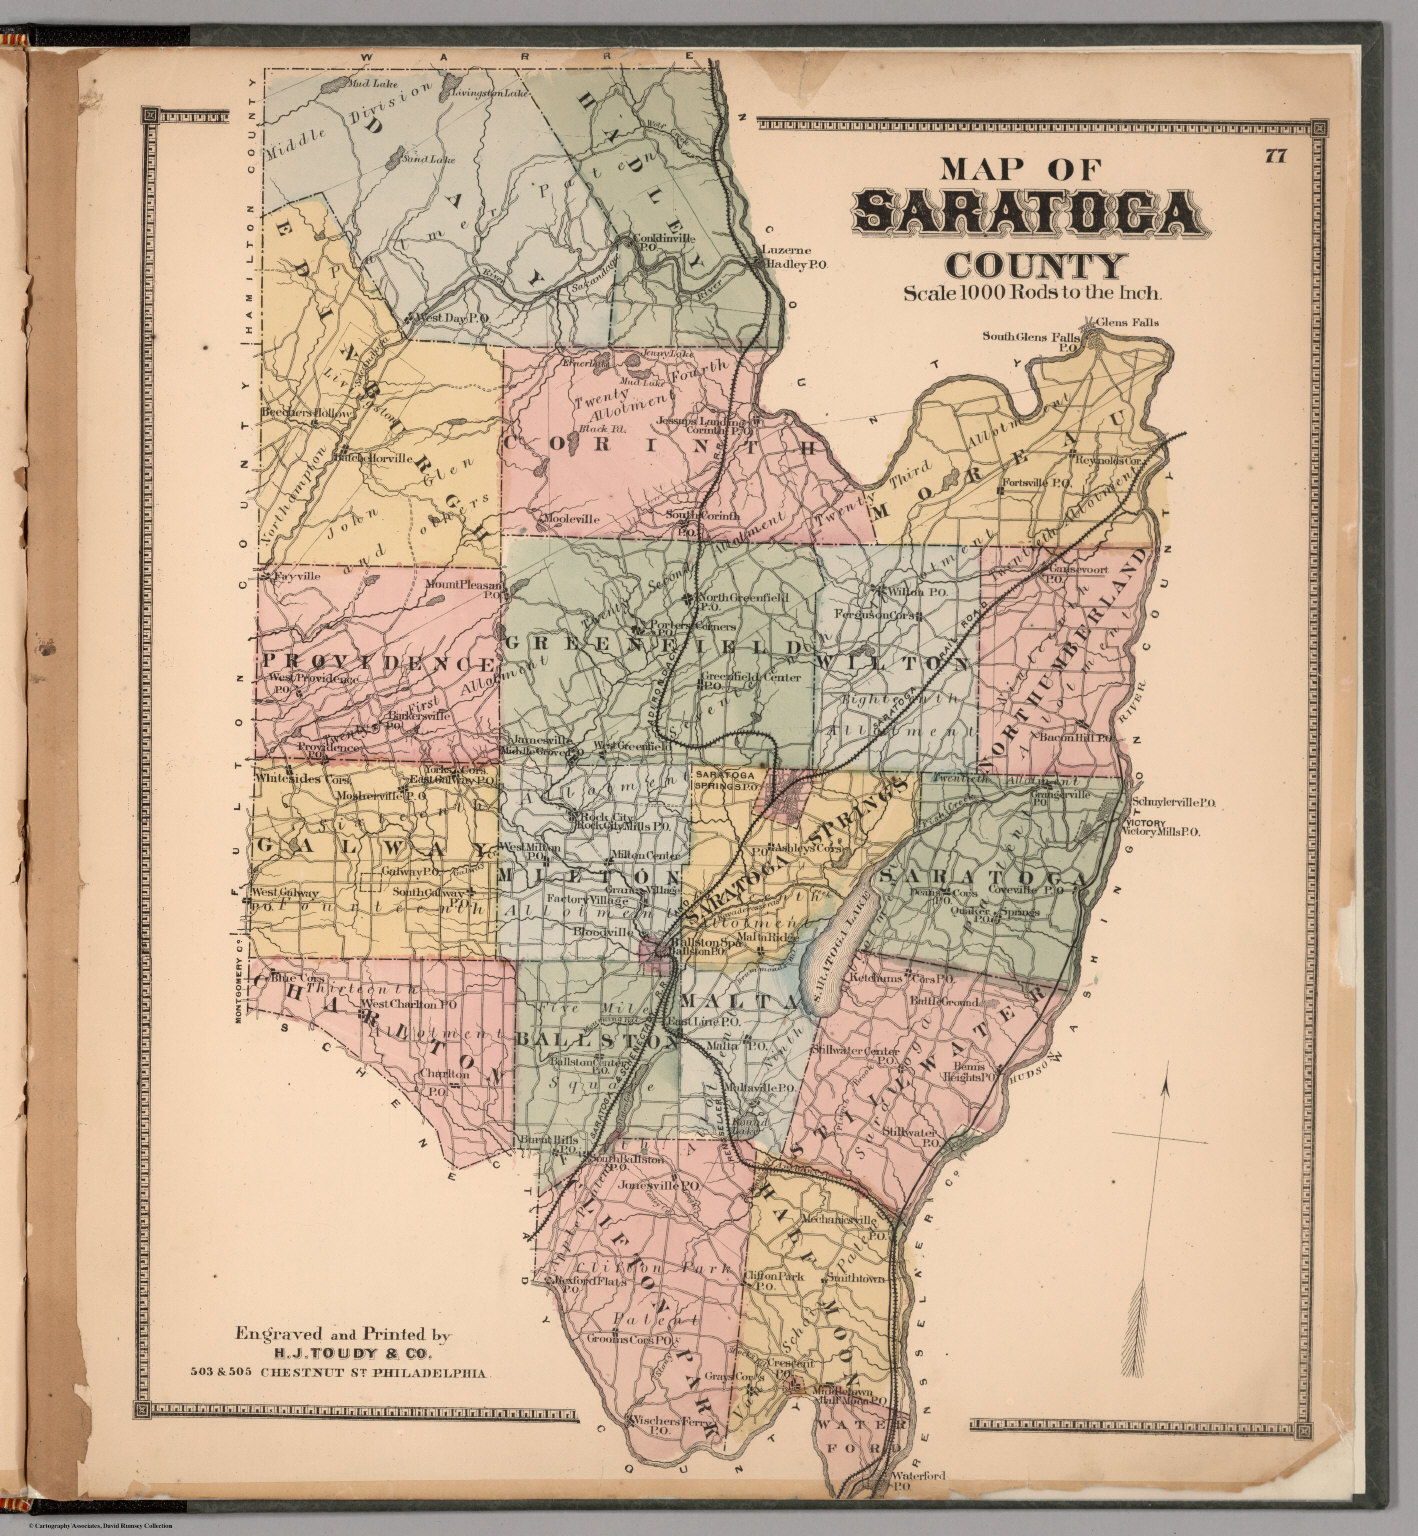 Saratoga County New York David Rumsey Historical Map Collection